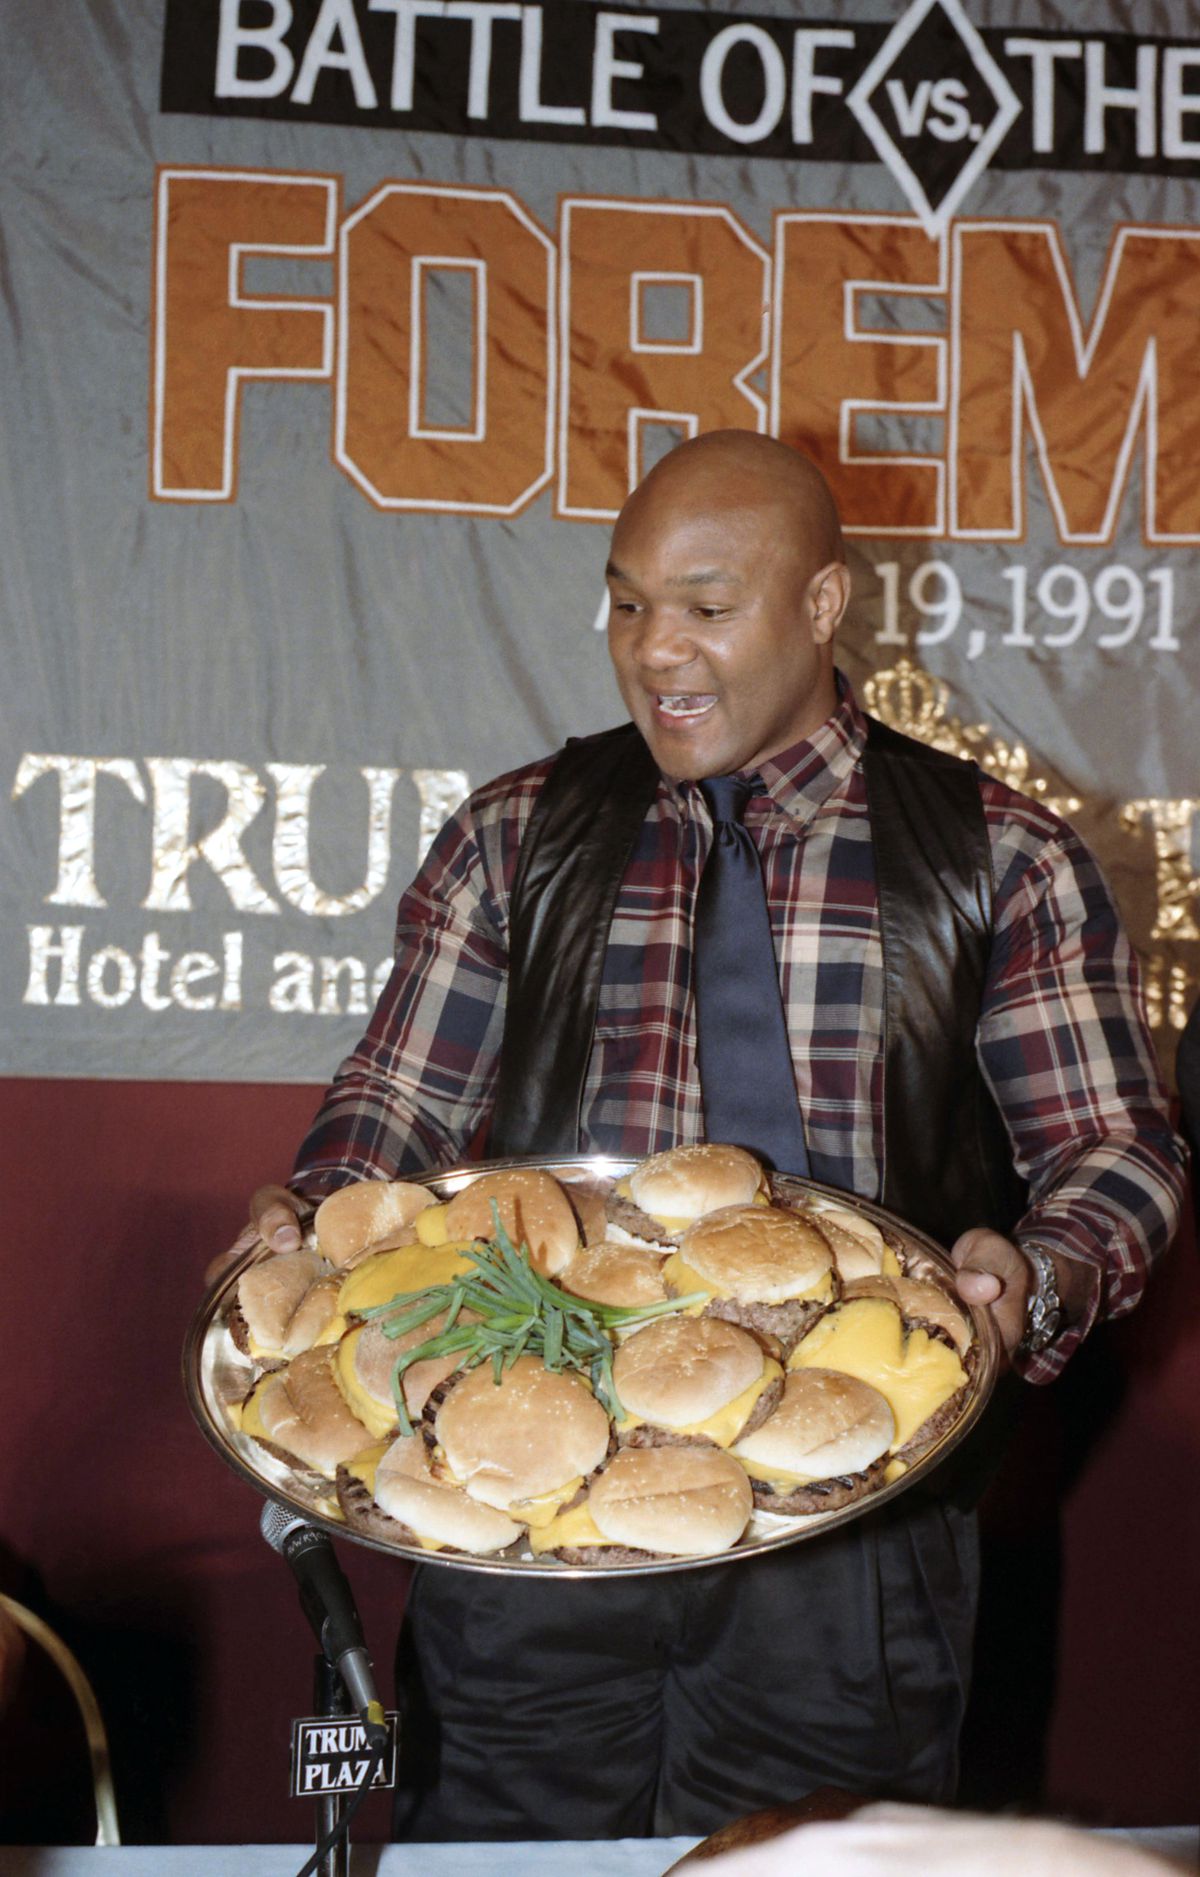 George Foreman and Evander Holyfield press conference